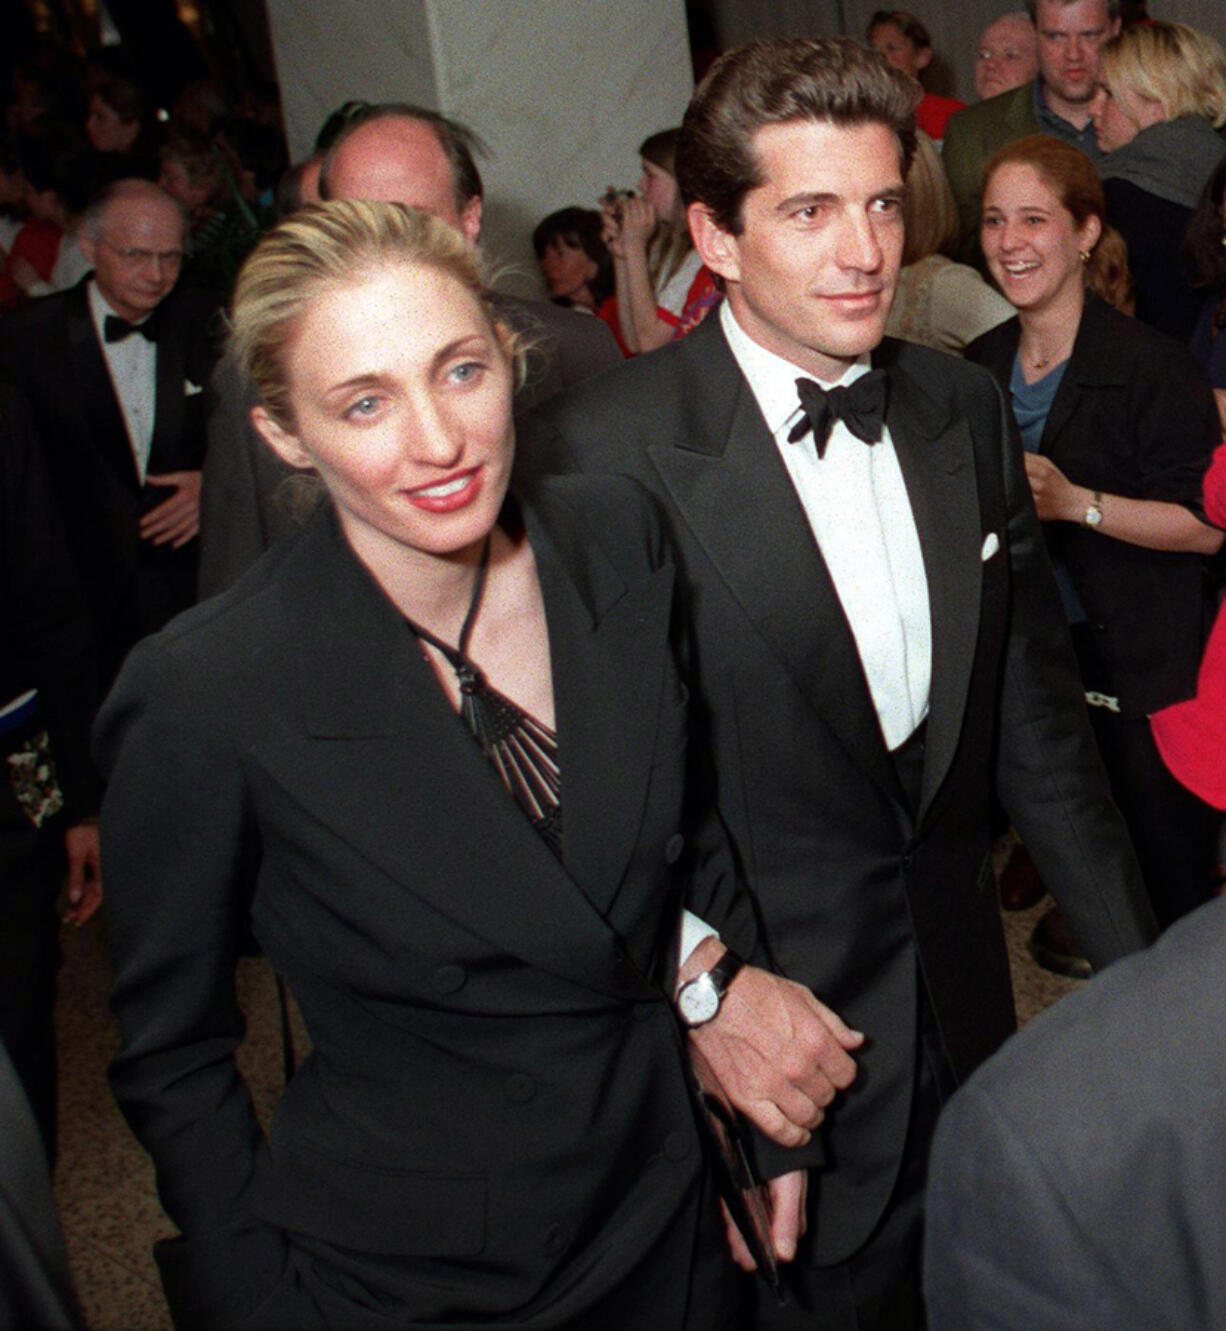 John F. Kennedy Jr. and his wife, Carolyn Bessette-Kennedy, leave the White House Correspondents&rsquo; Association&rsquo;s annual dinner May 1, 1999, in Washington, D.C.